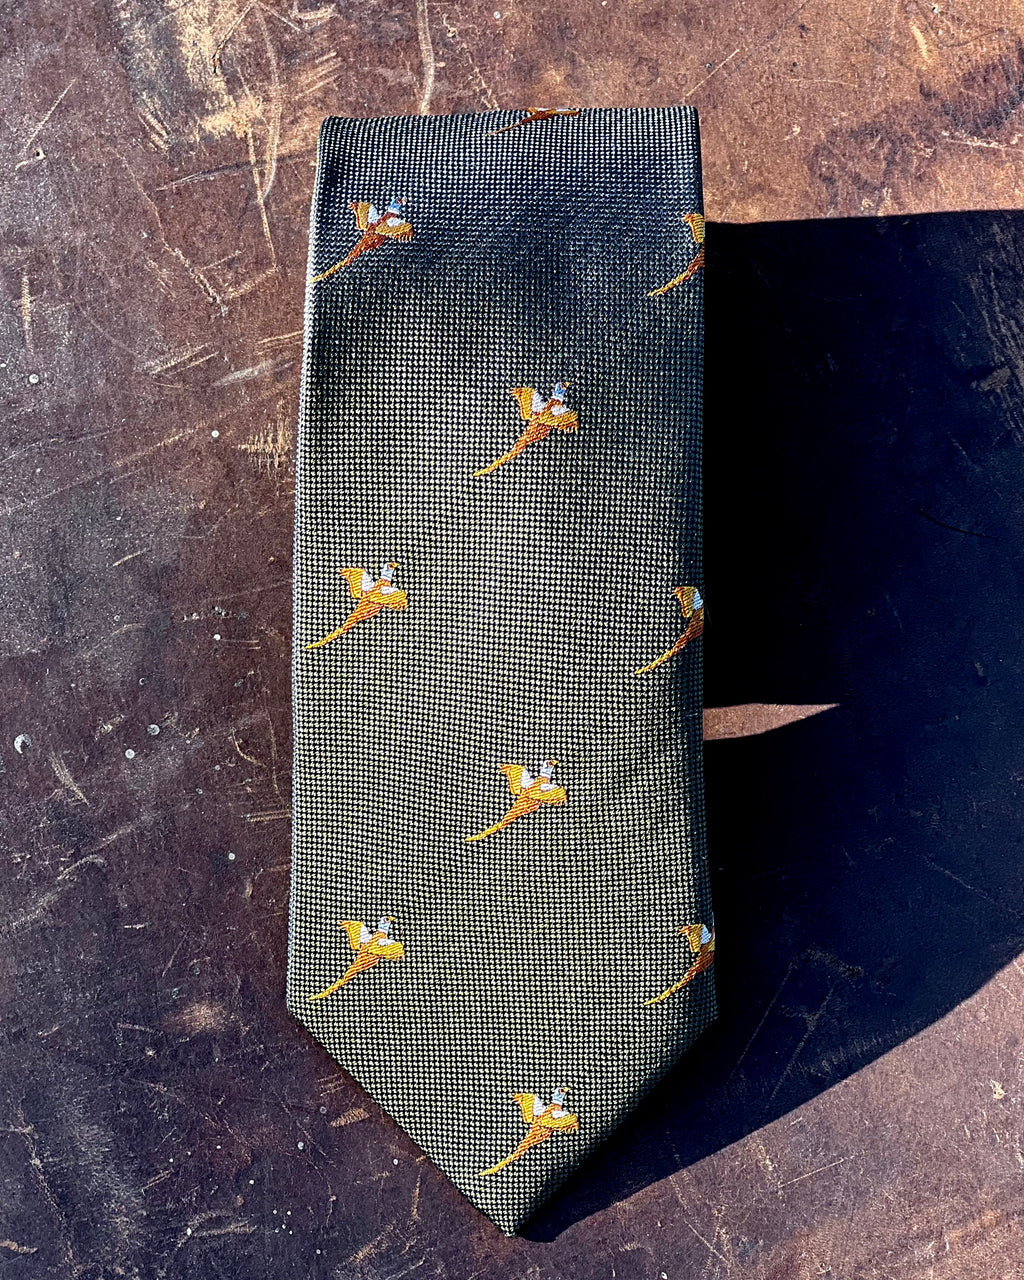 Silk tie featuring a gold pheasant motif against an olive green background